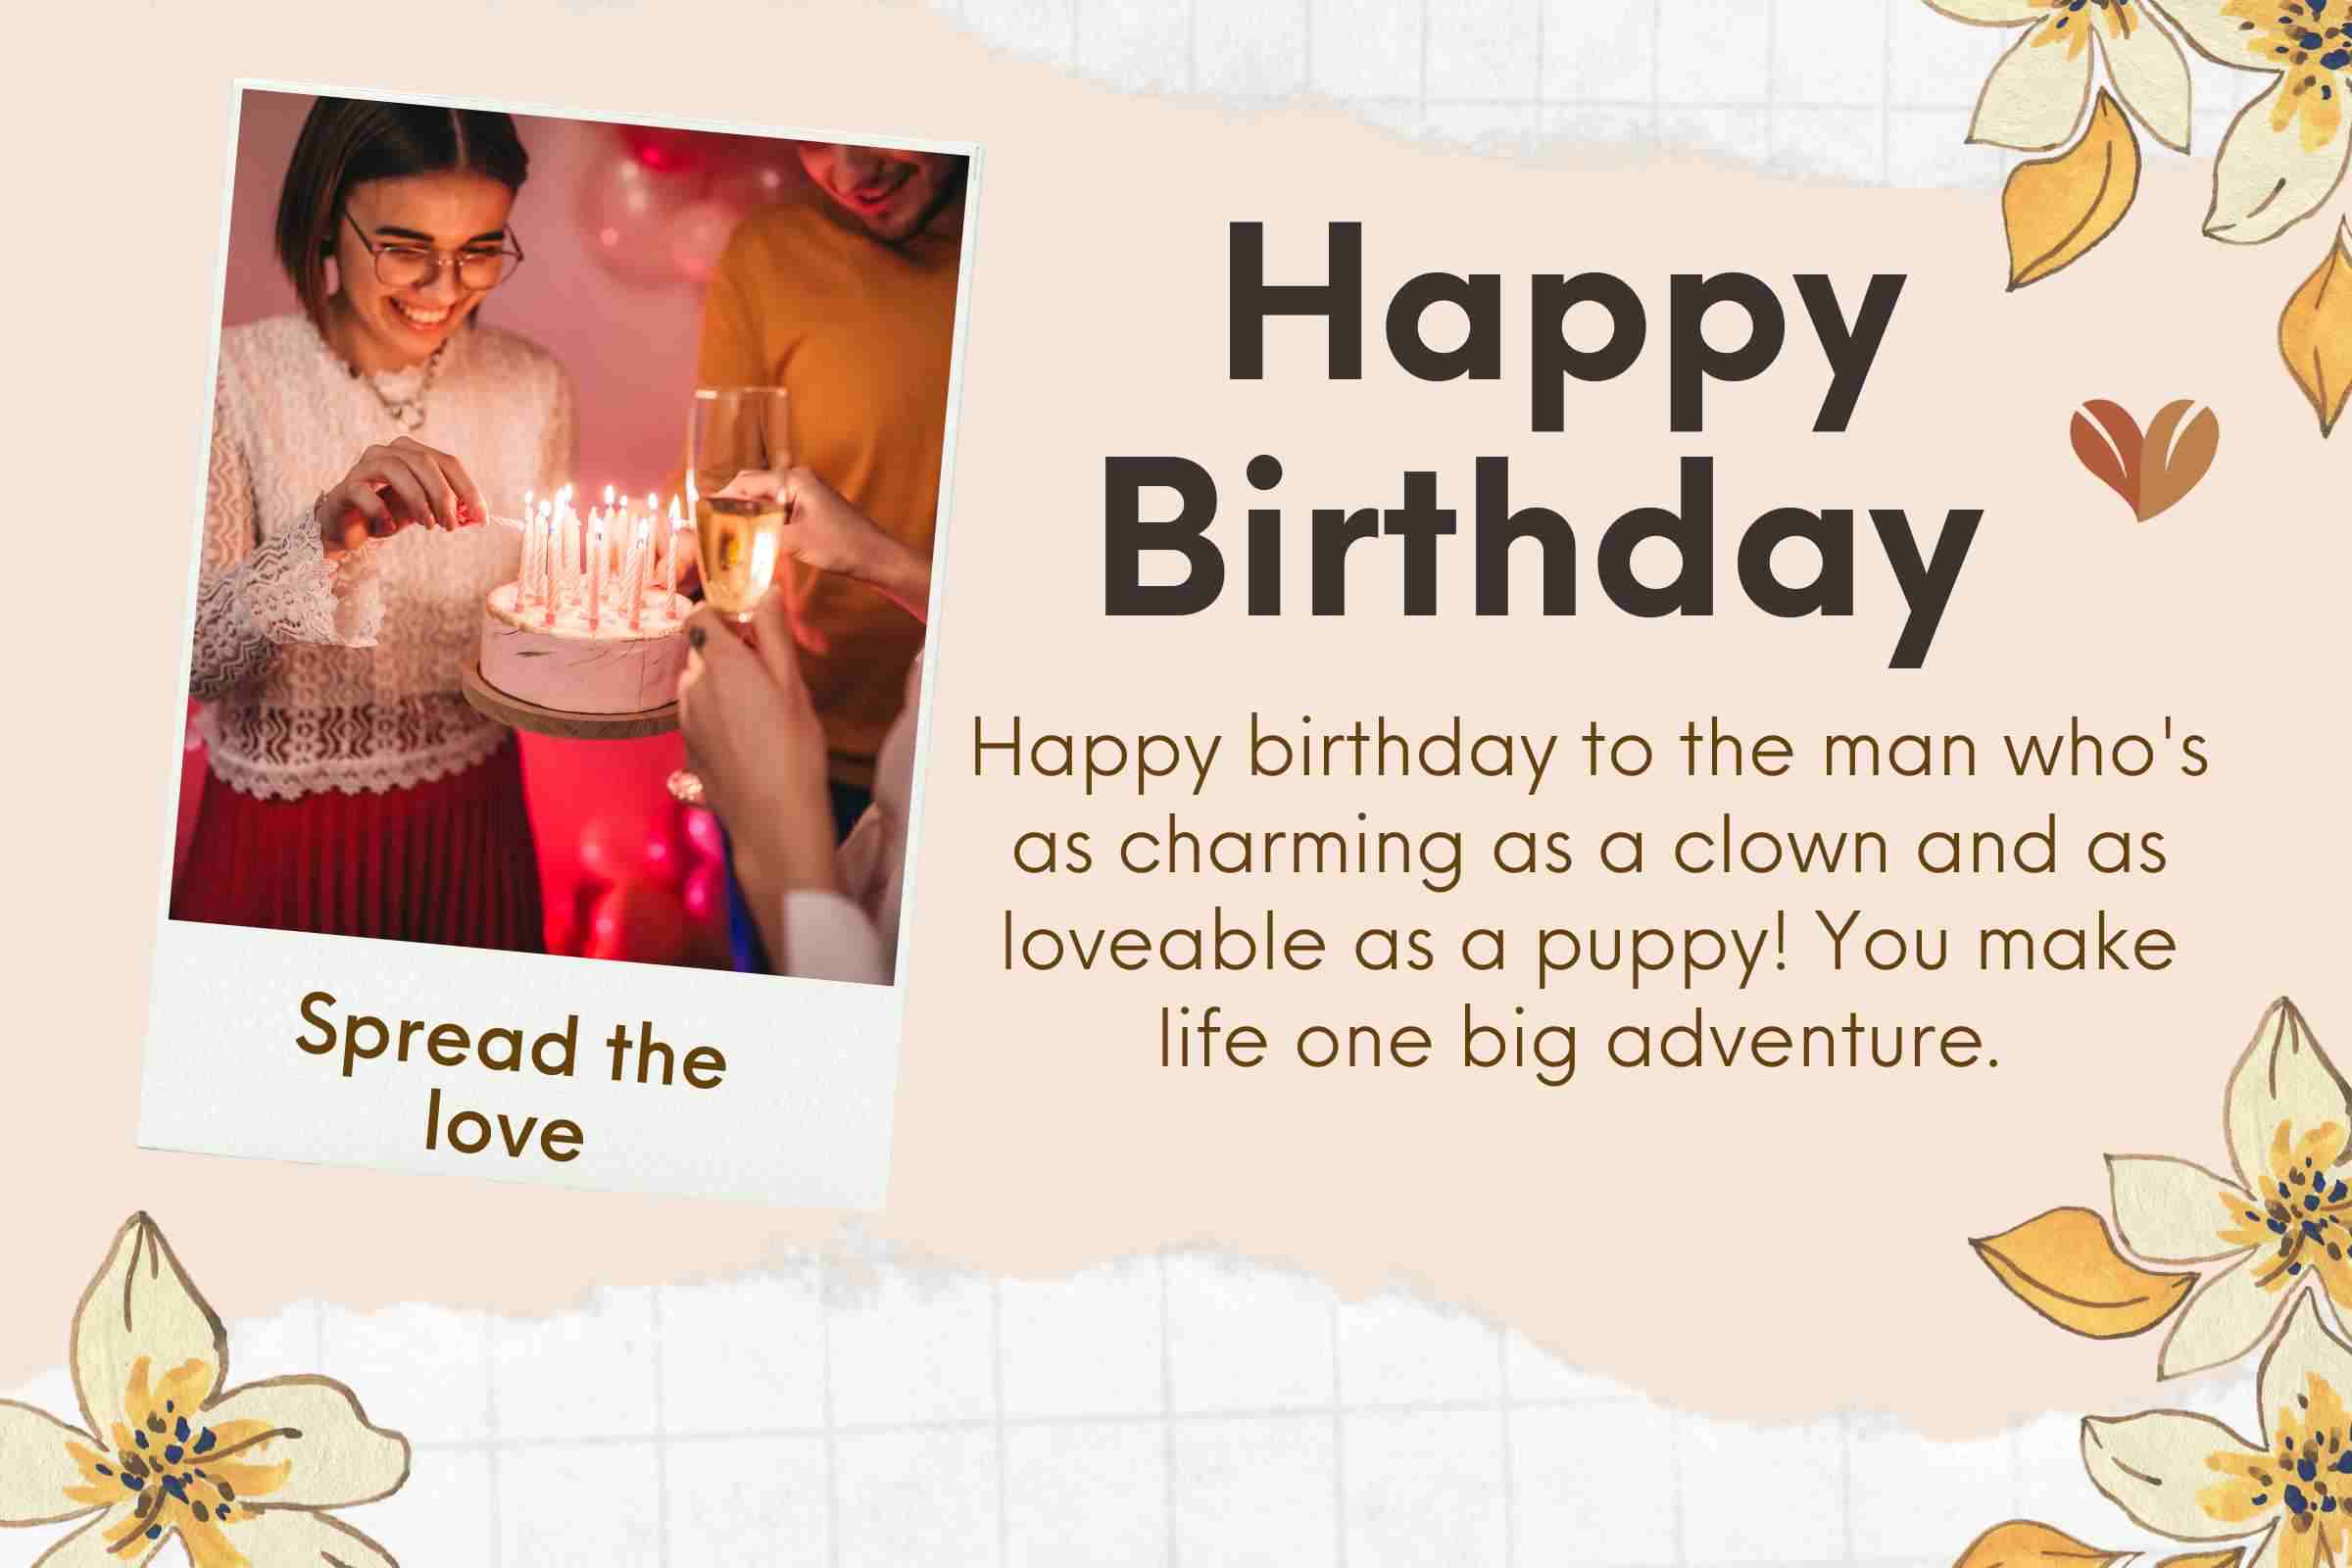 Happy birthday, my perfect match! - Heart touching birthday wishes for husband